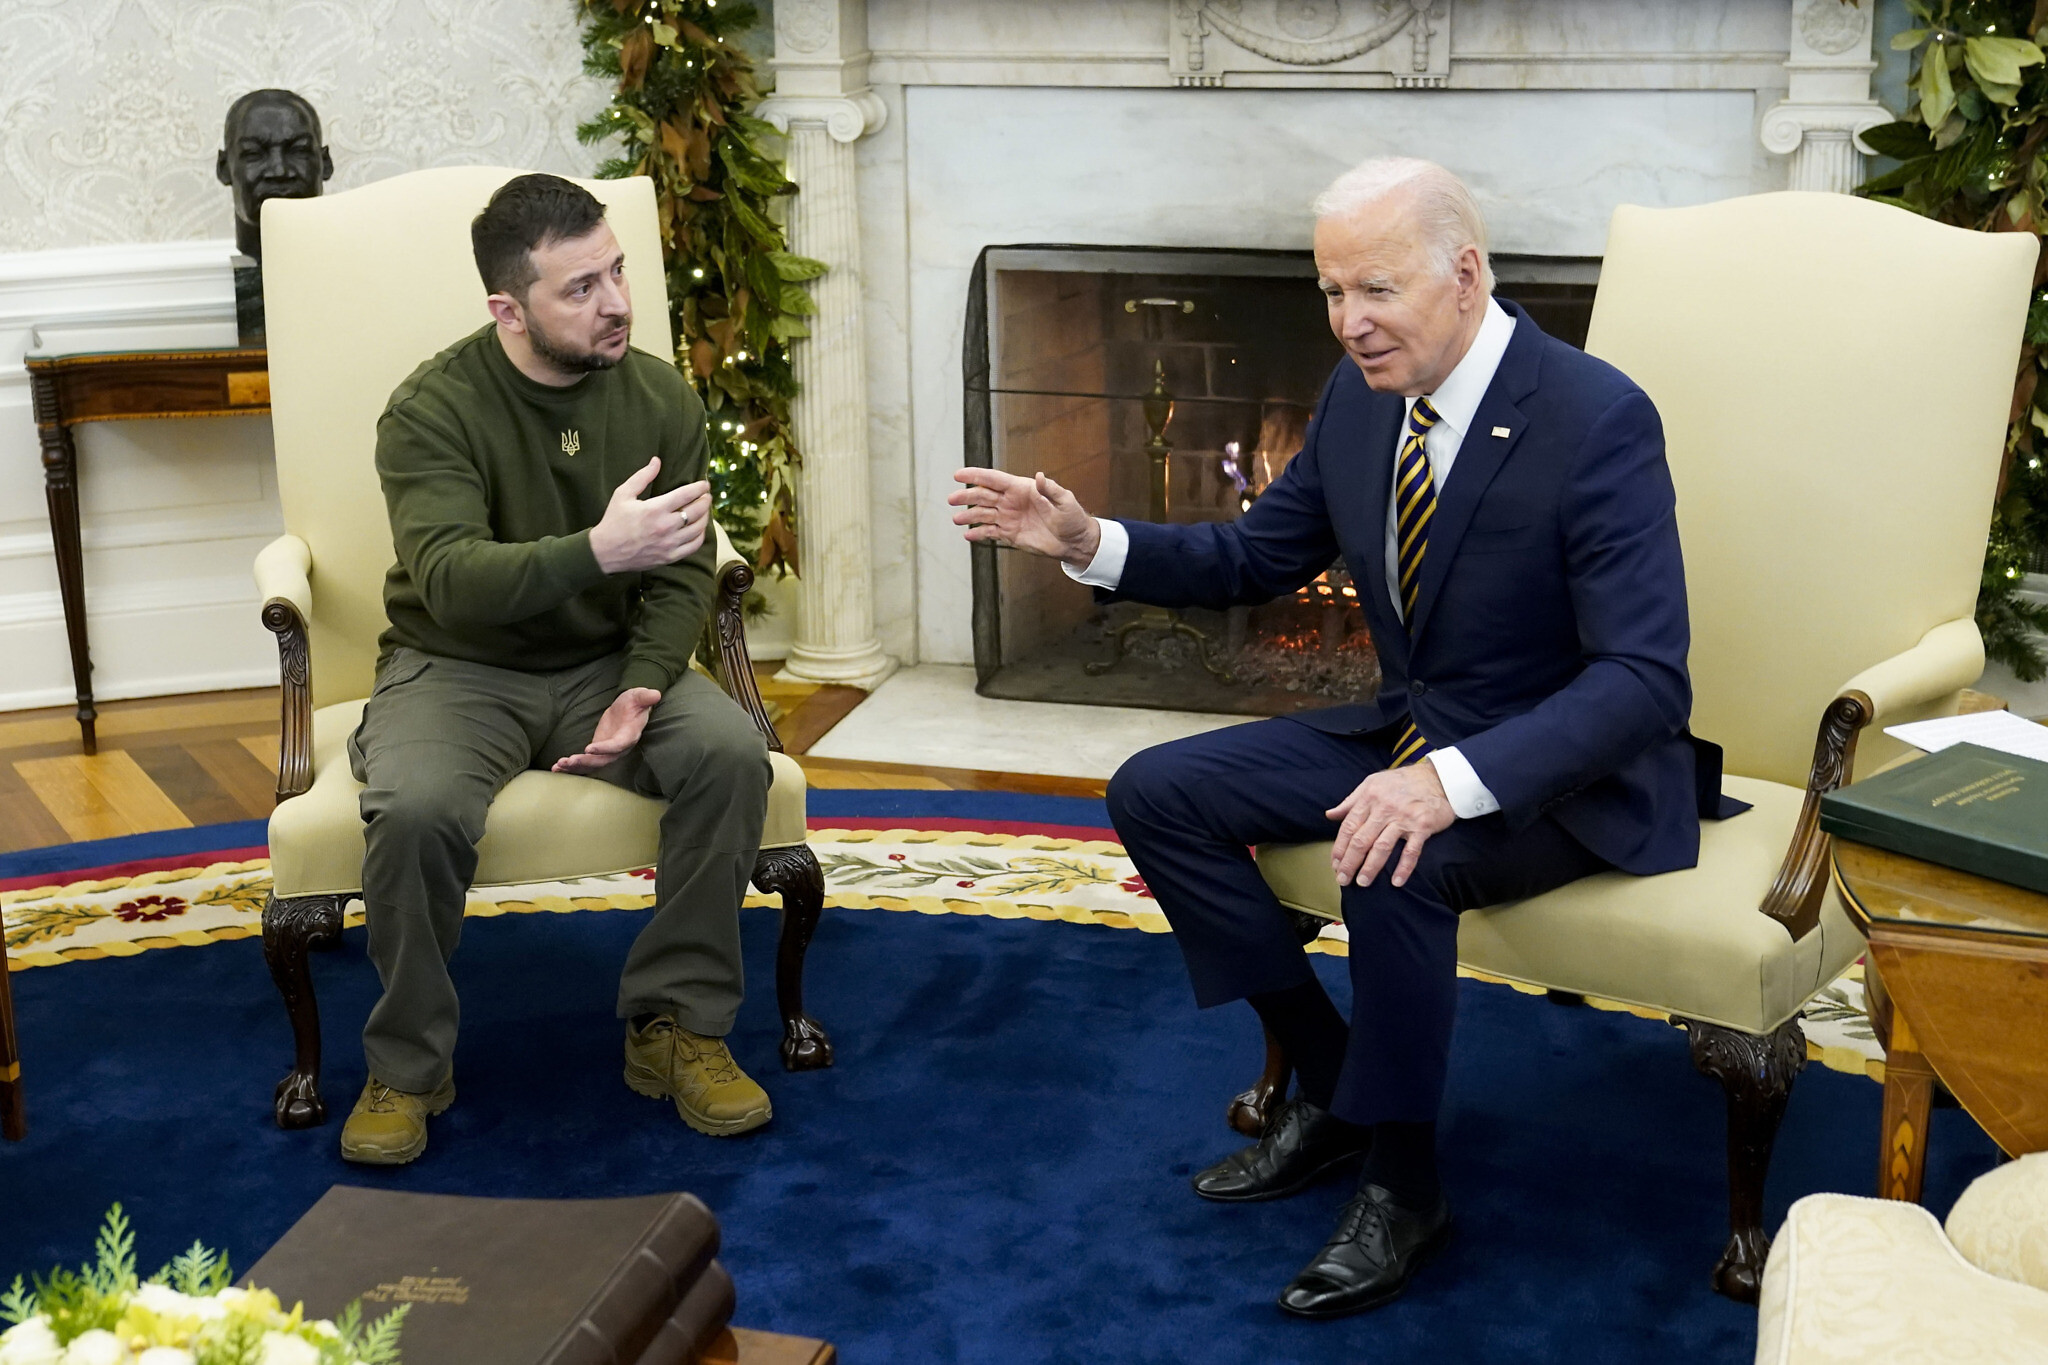 Hosting Zelensky in Washington, Biden declares 'it's an honor to be by your side' | The Times of Israel